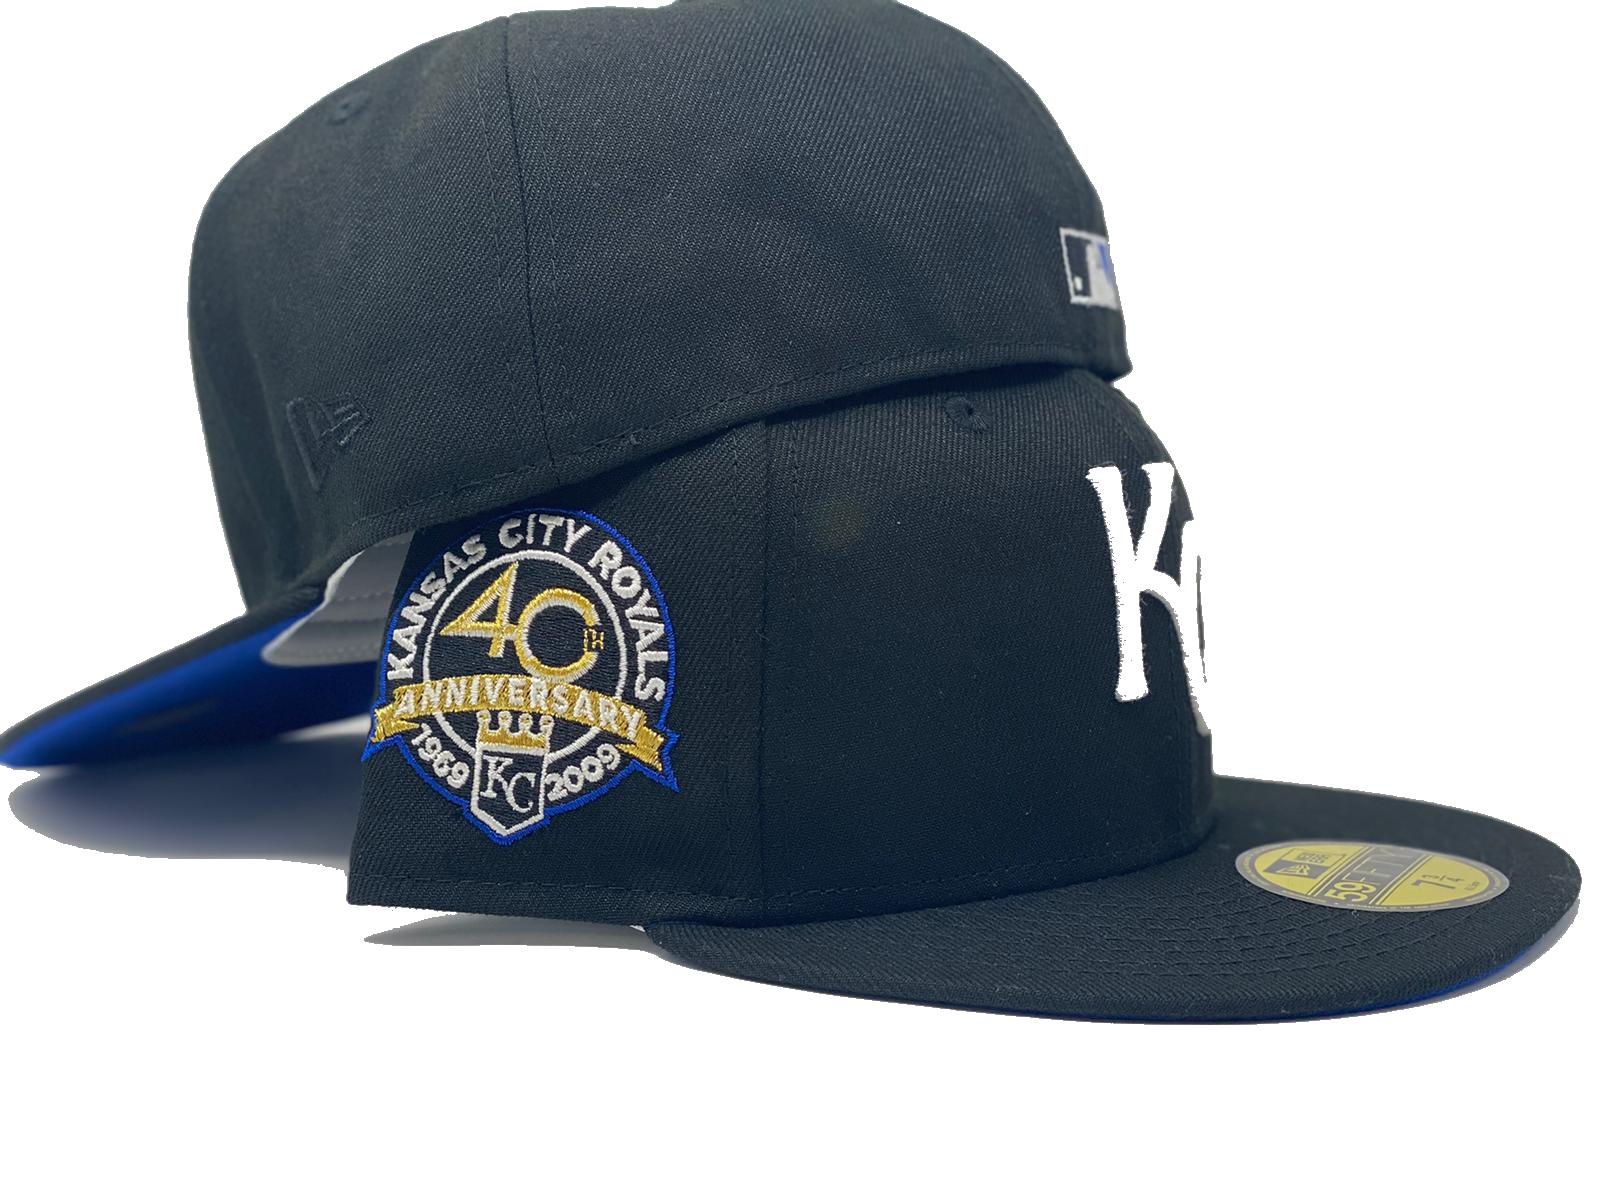 Kansas City Royals - Gear up for the new season with 40% off at the Royals  Team Store on Black Friday! royals.com/teamstore